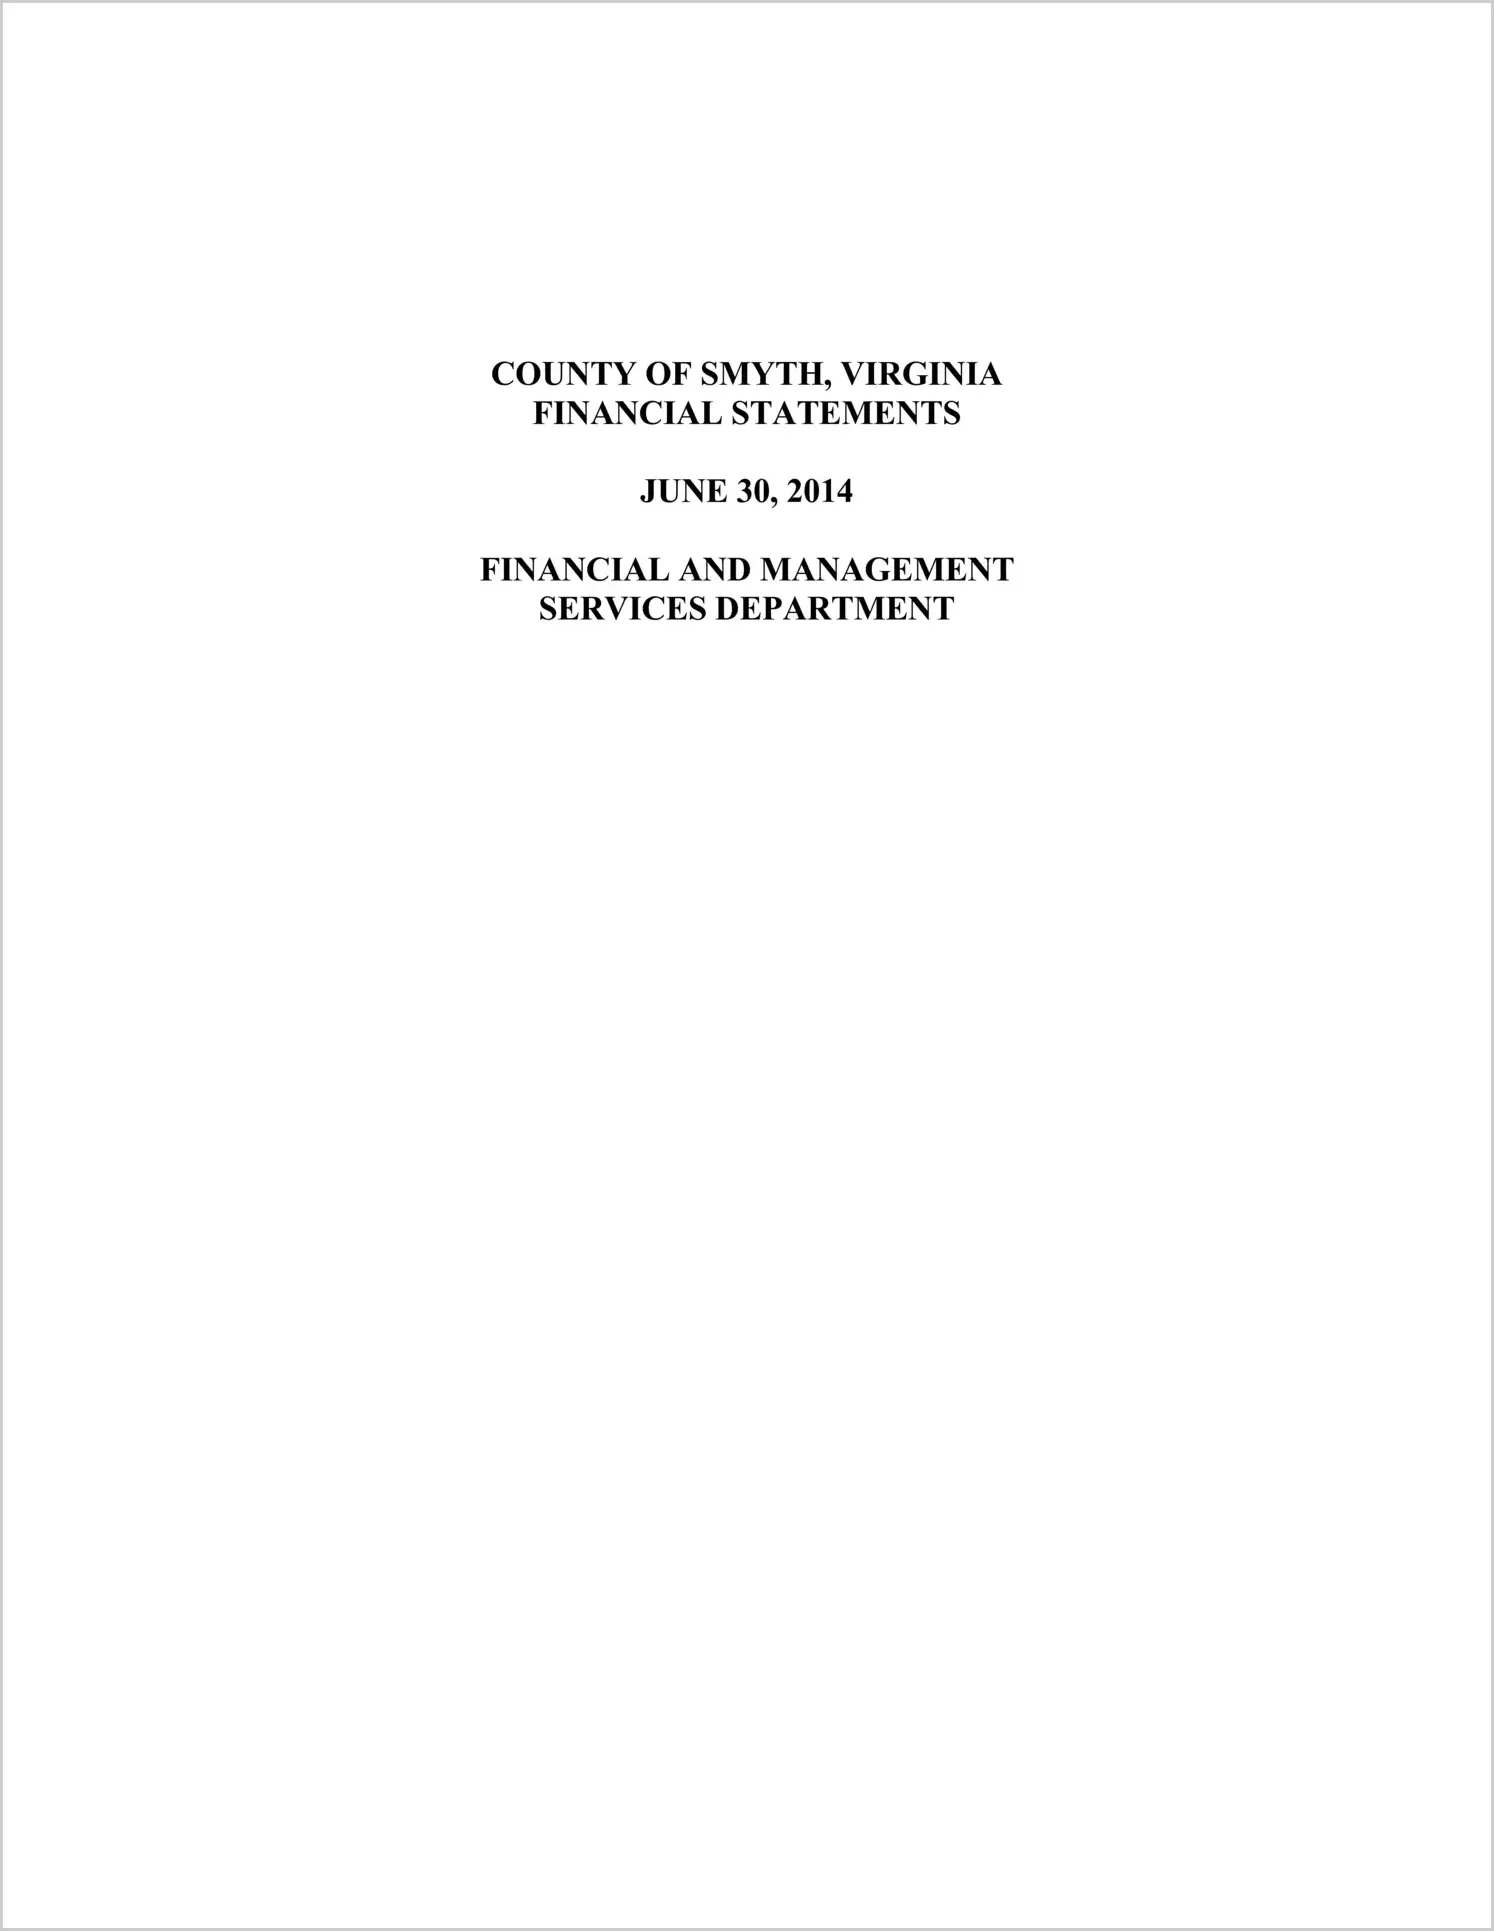 2014 Annual Financial Report for County of Smyth